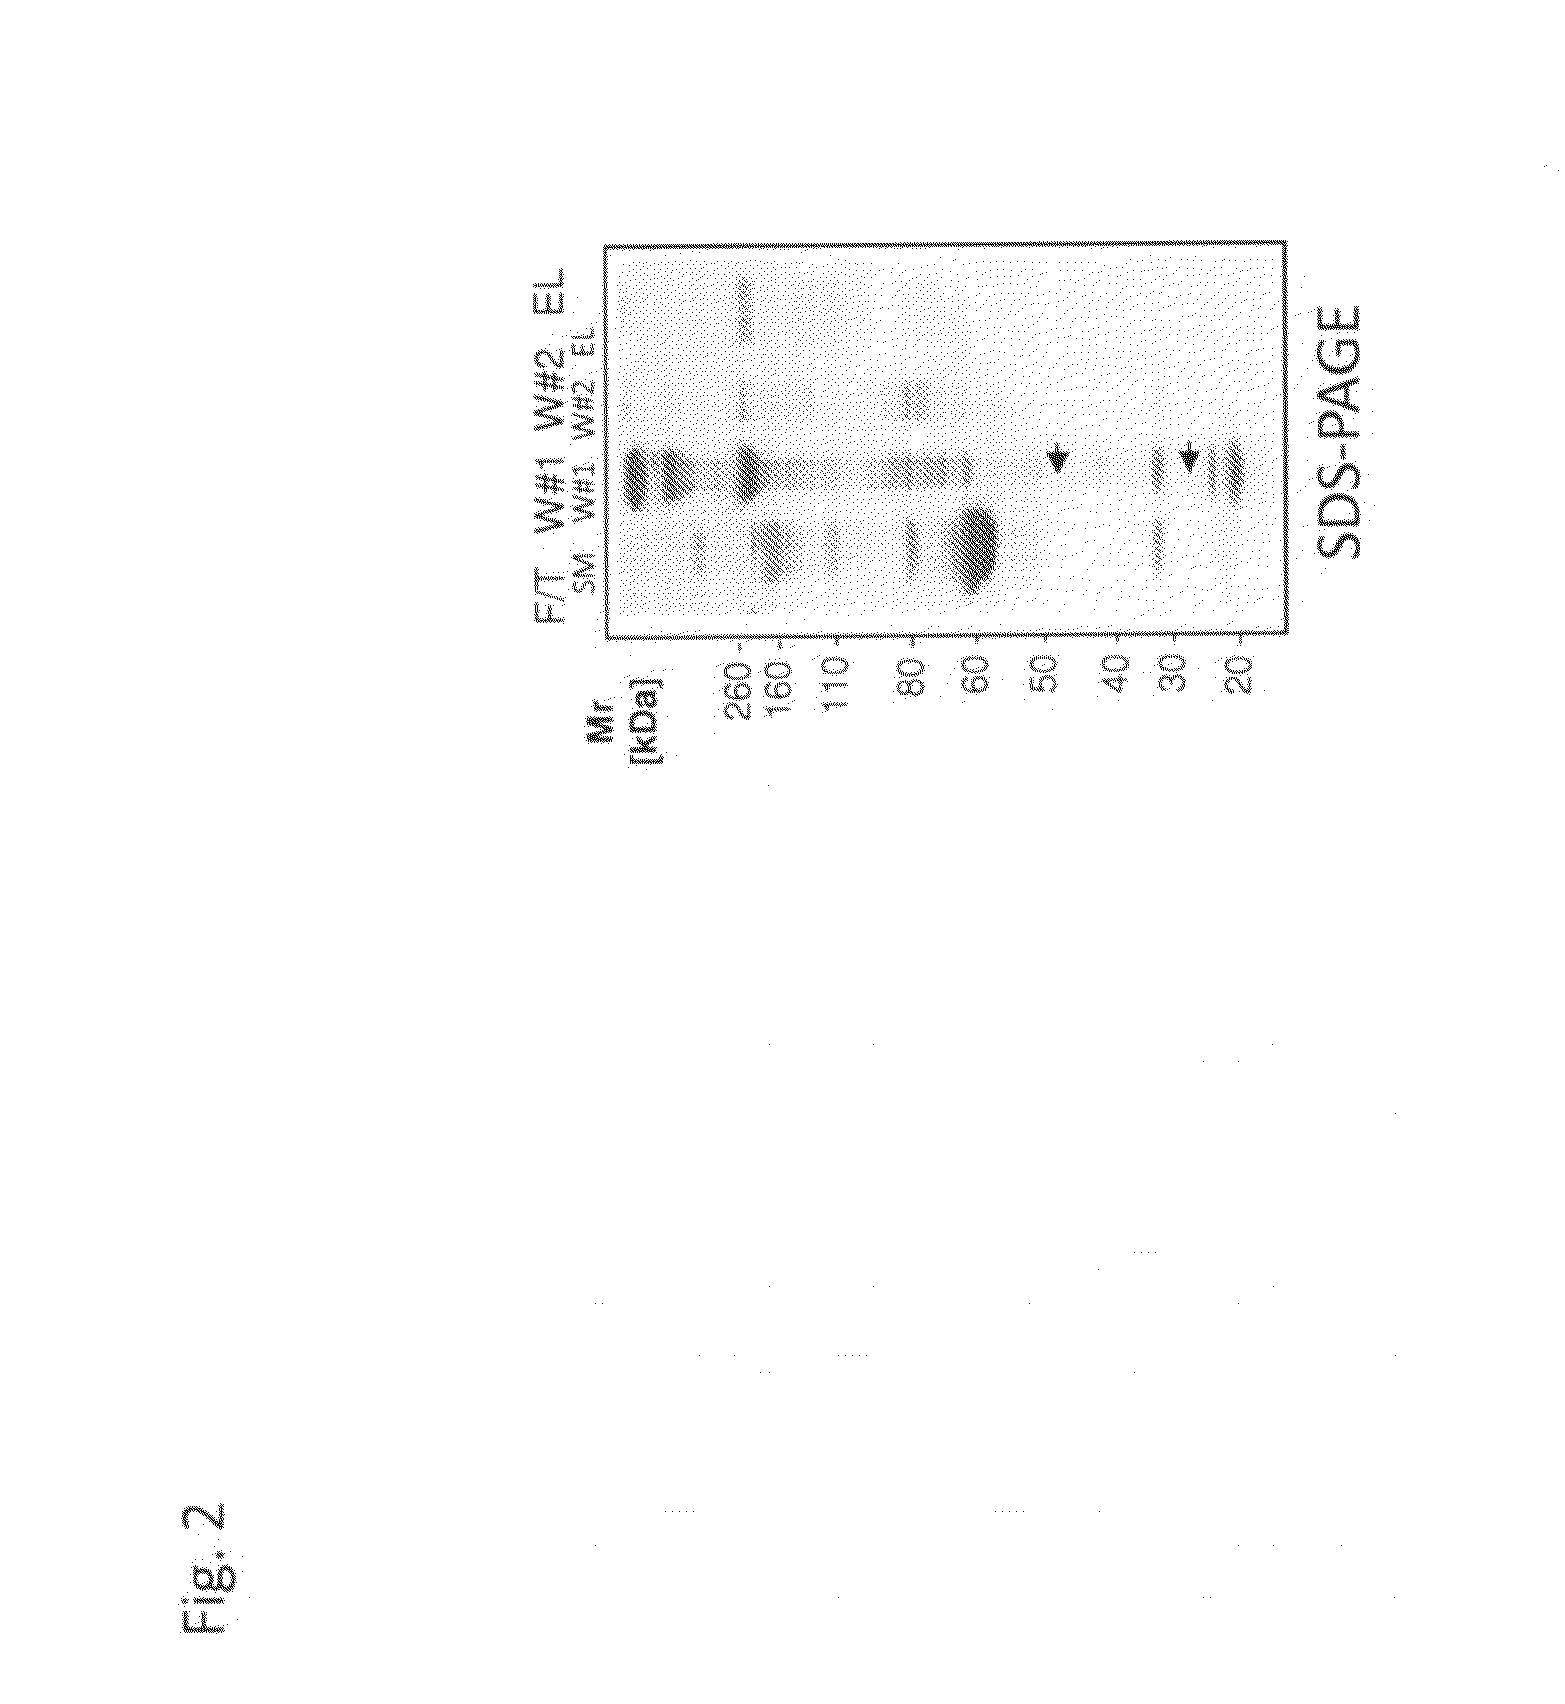 Methods for isolating blood products from an inter-alpha inhibitor protein-depleted blood product material